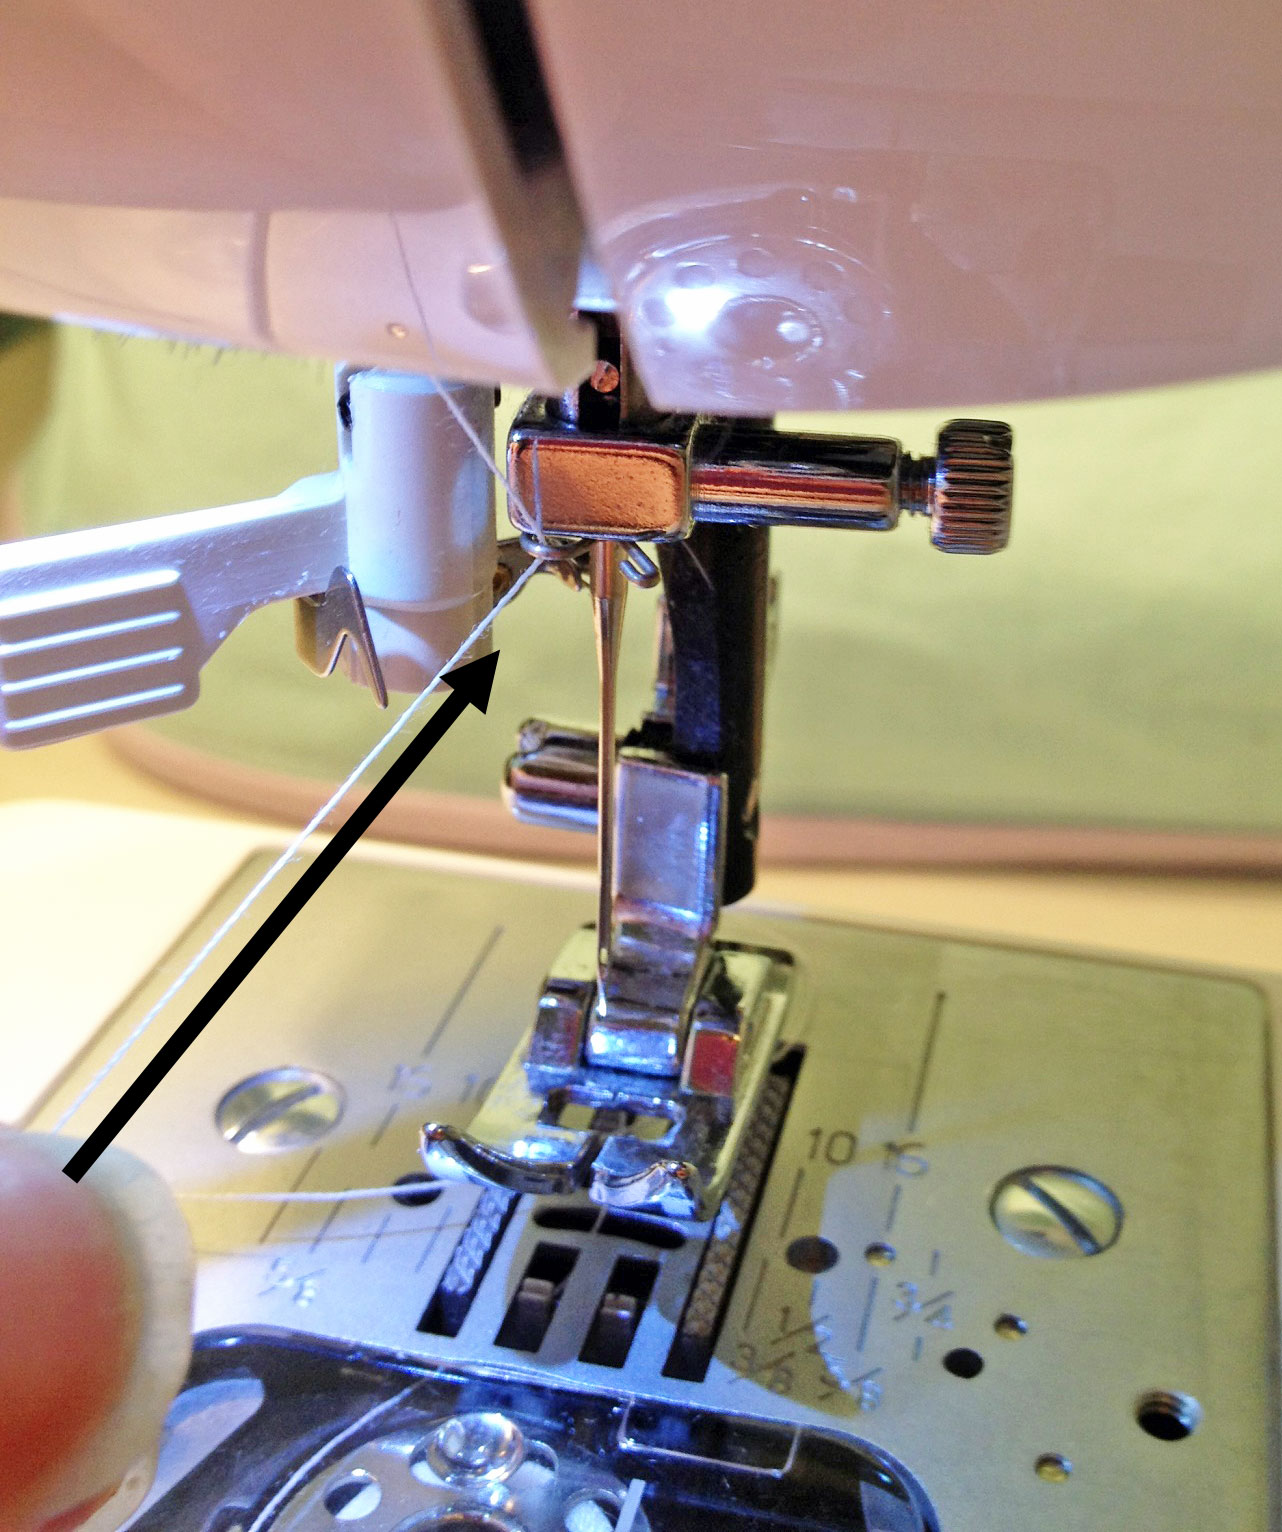 How to Clean Your Sewing Machine - Hooked on Sewing